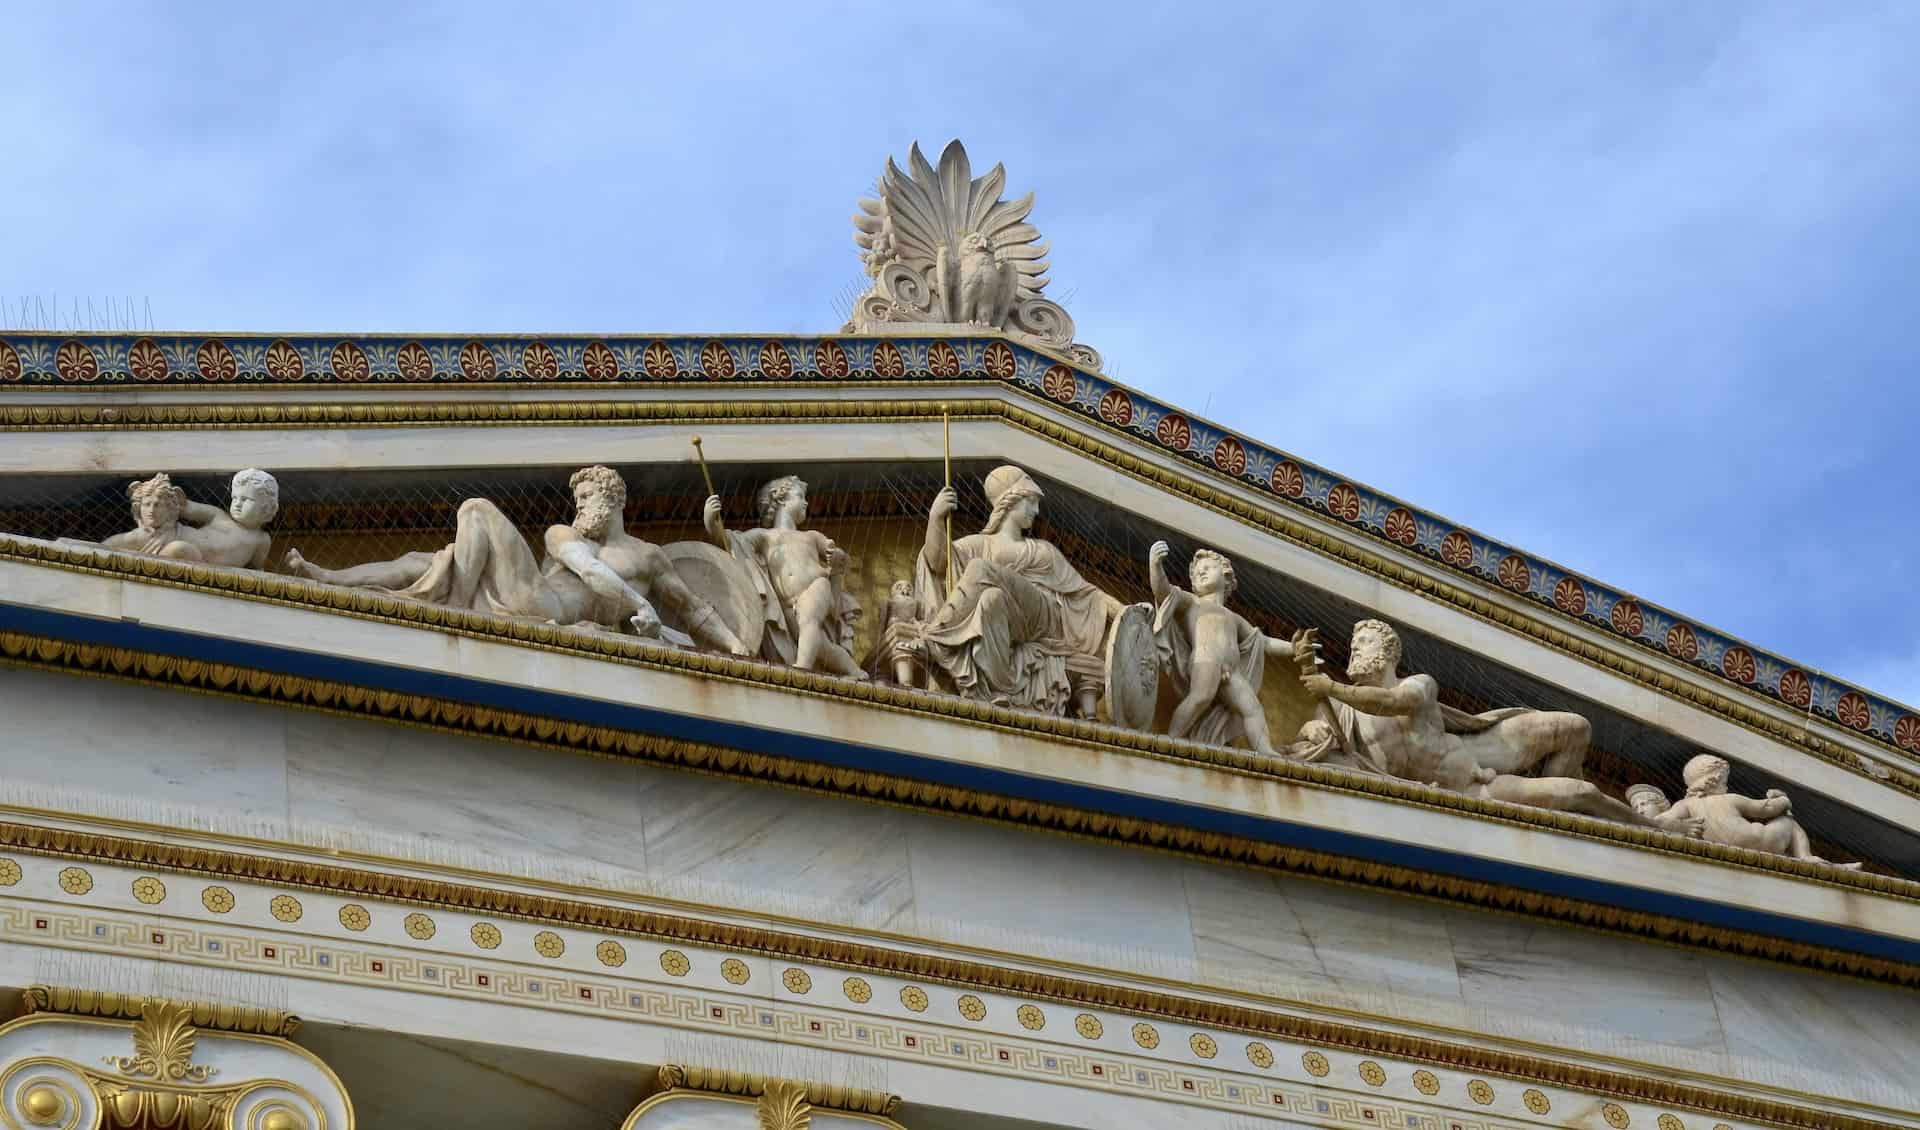 Southwest pediment of the south wing of the Academy of Athens